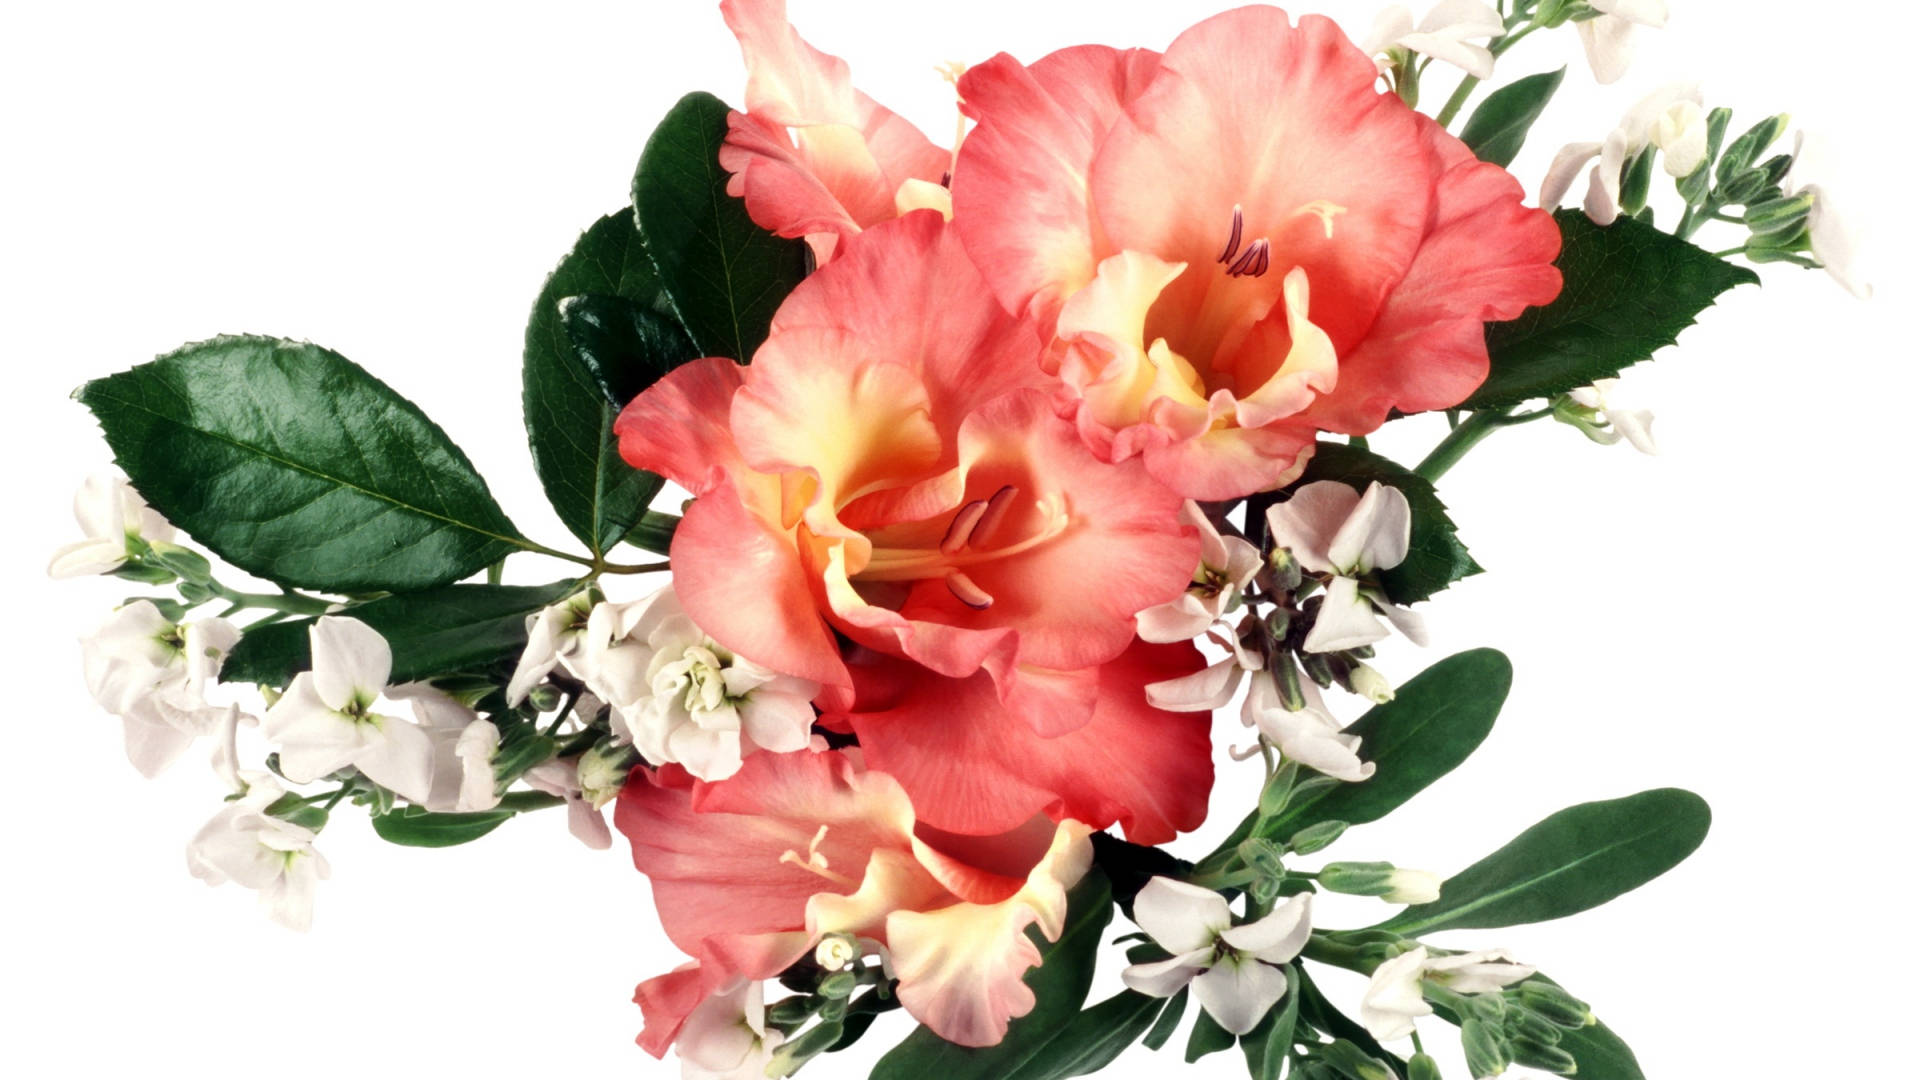 Gladiolus And Hoary Stock Flowers Background